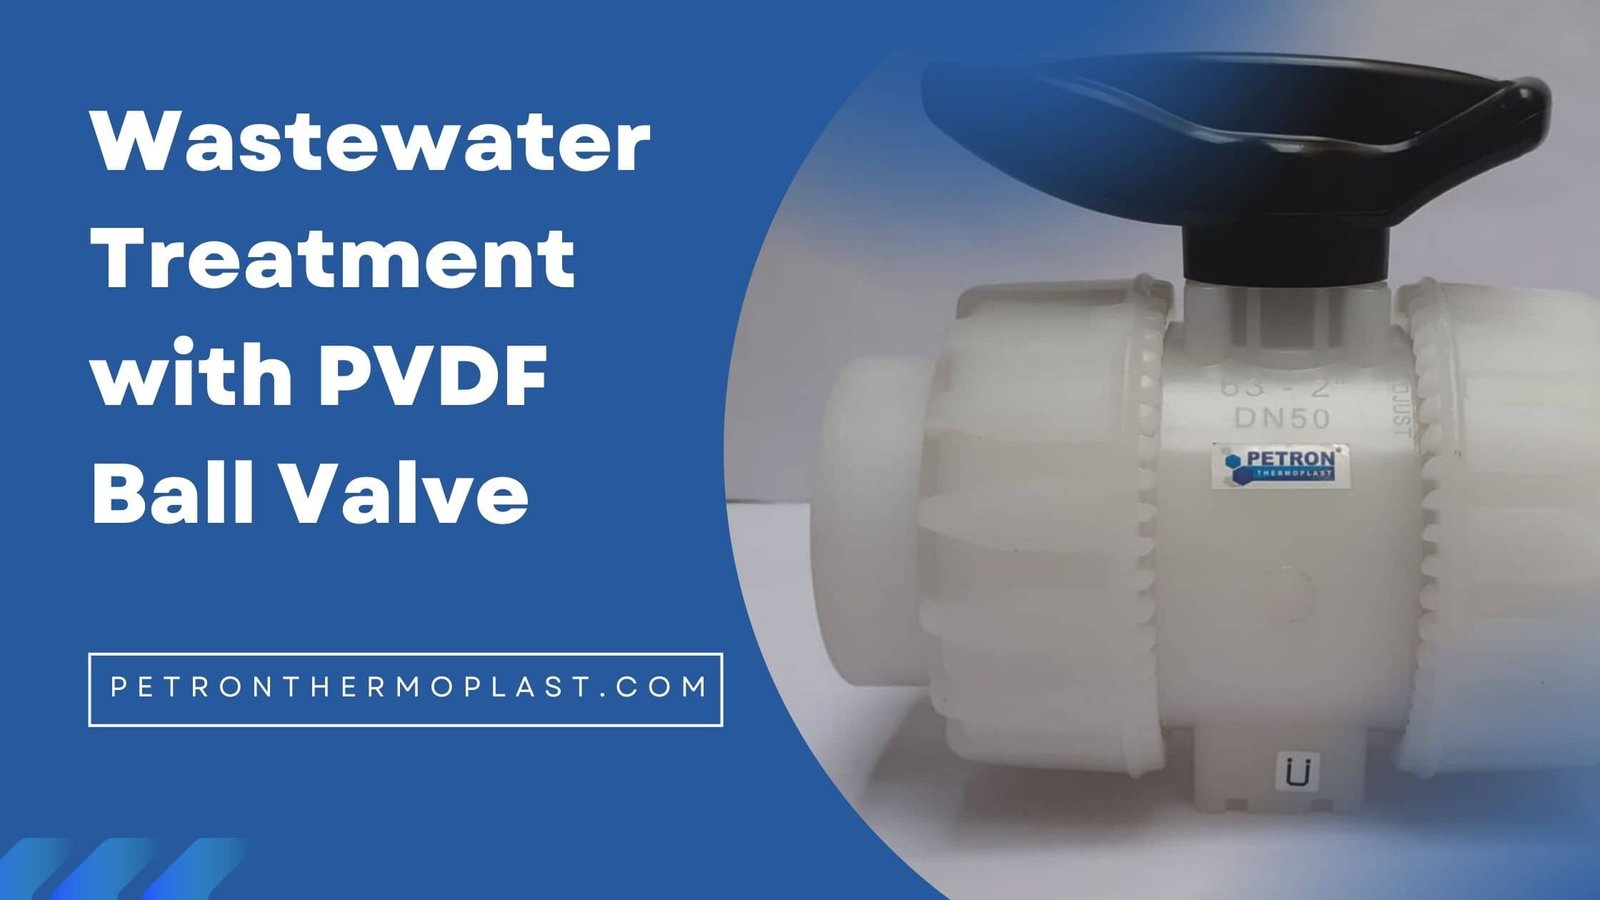 You are currently viewing Wastewater Treatment with PVDF Ball Valve